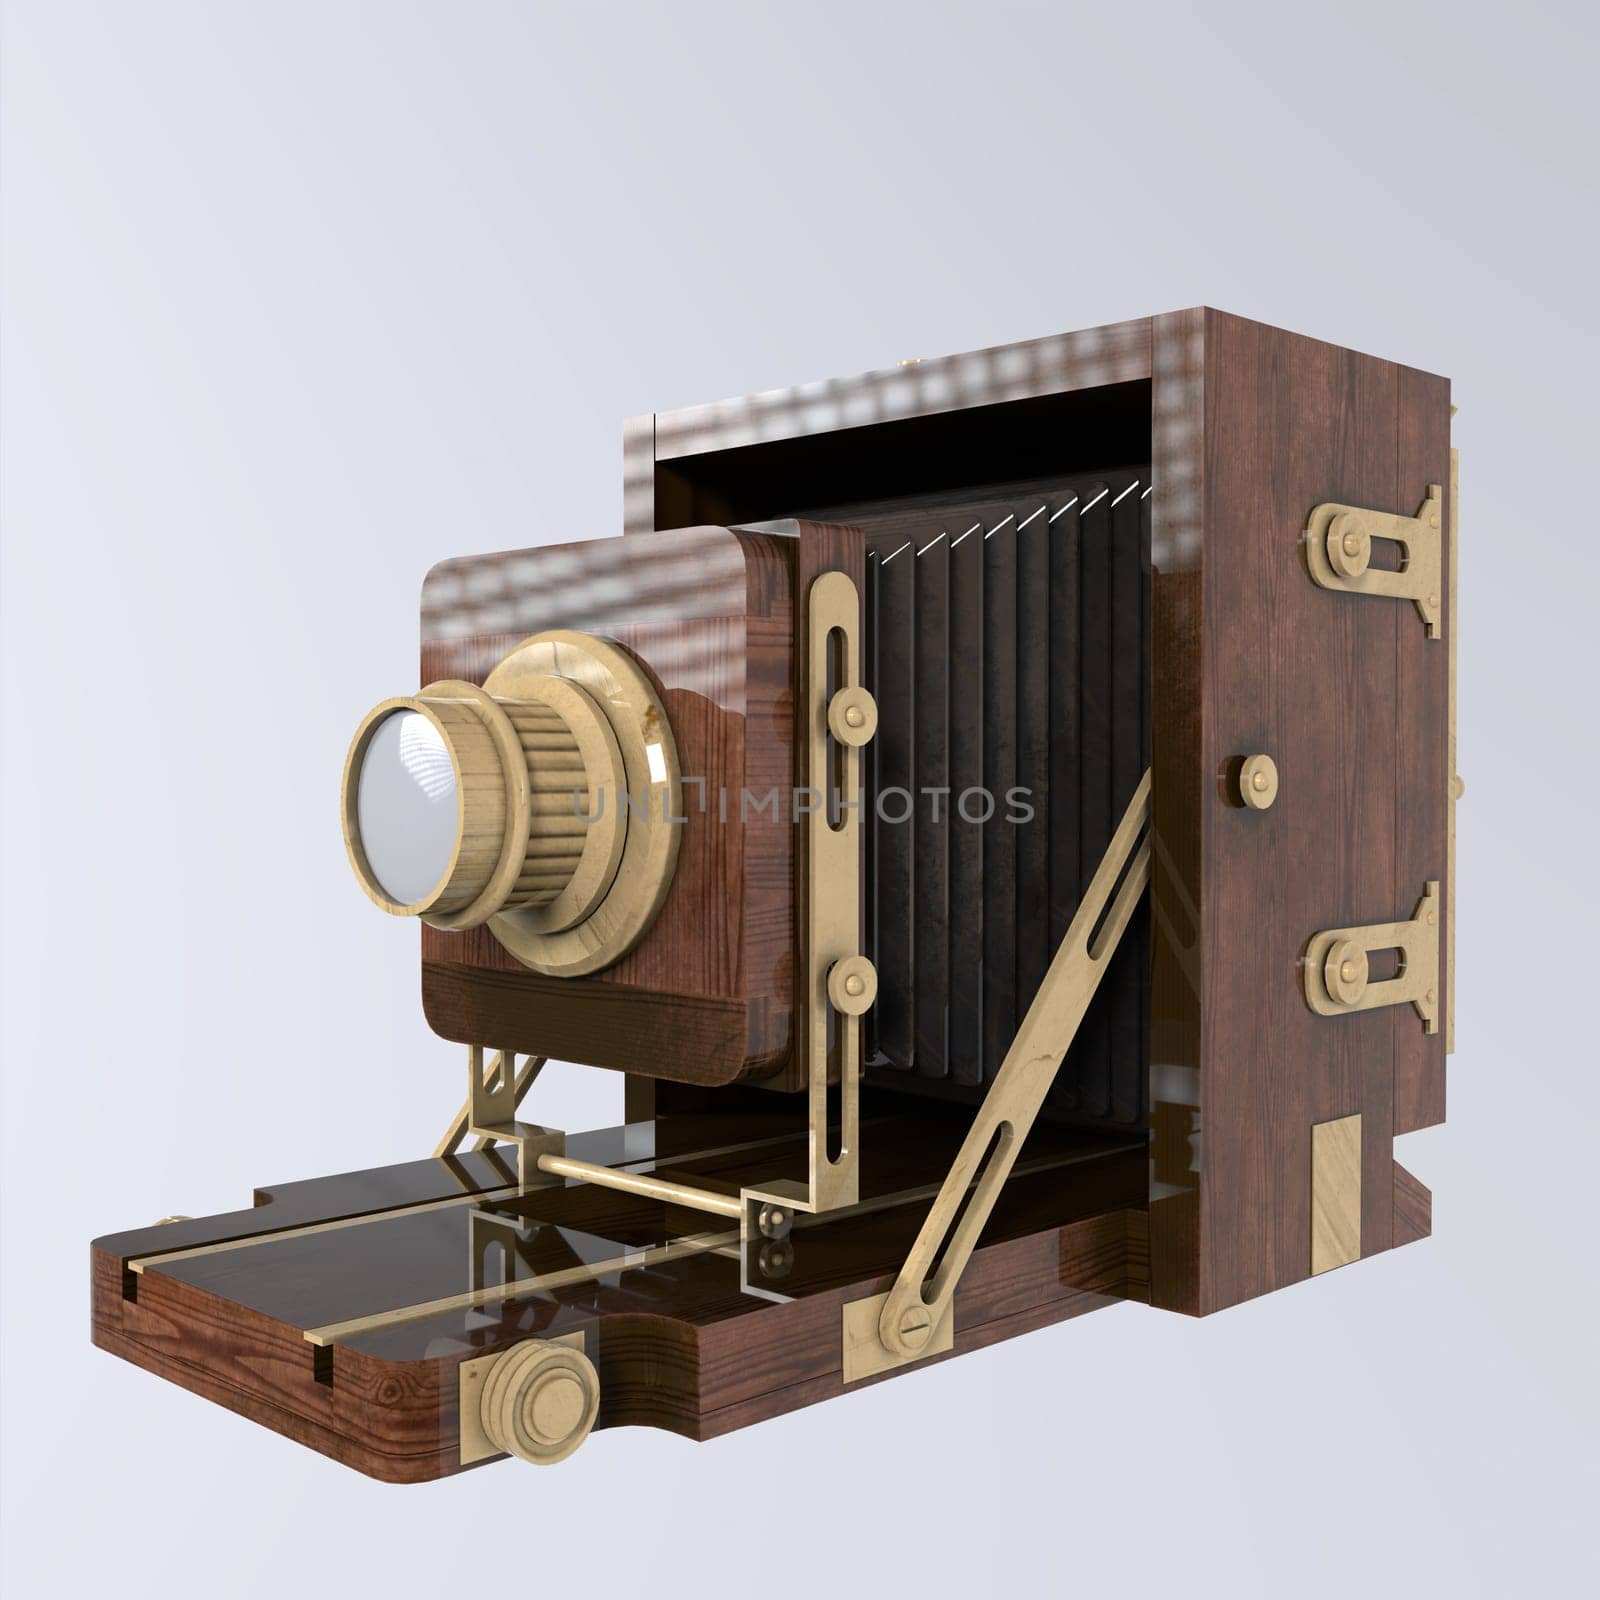 Polaroid Camera isolated on white background by gadreel